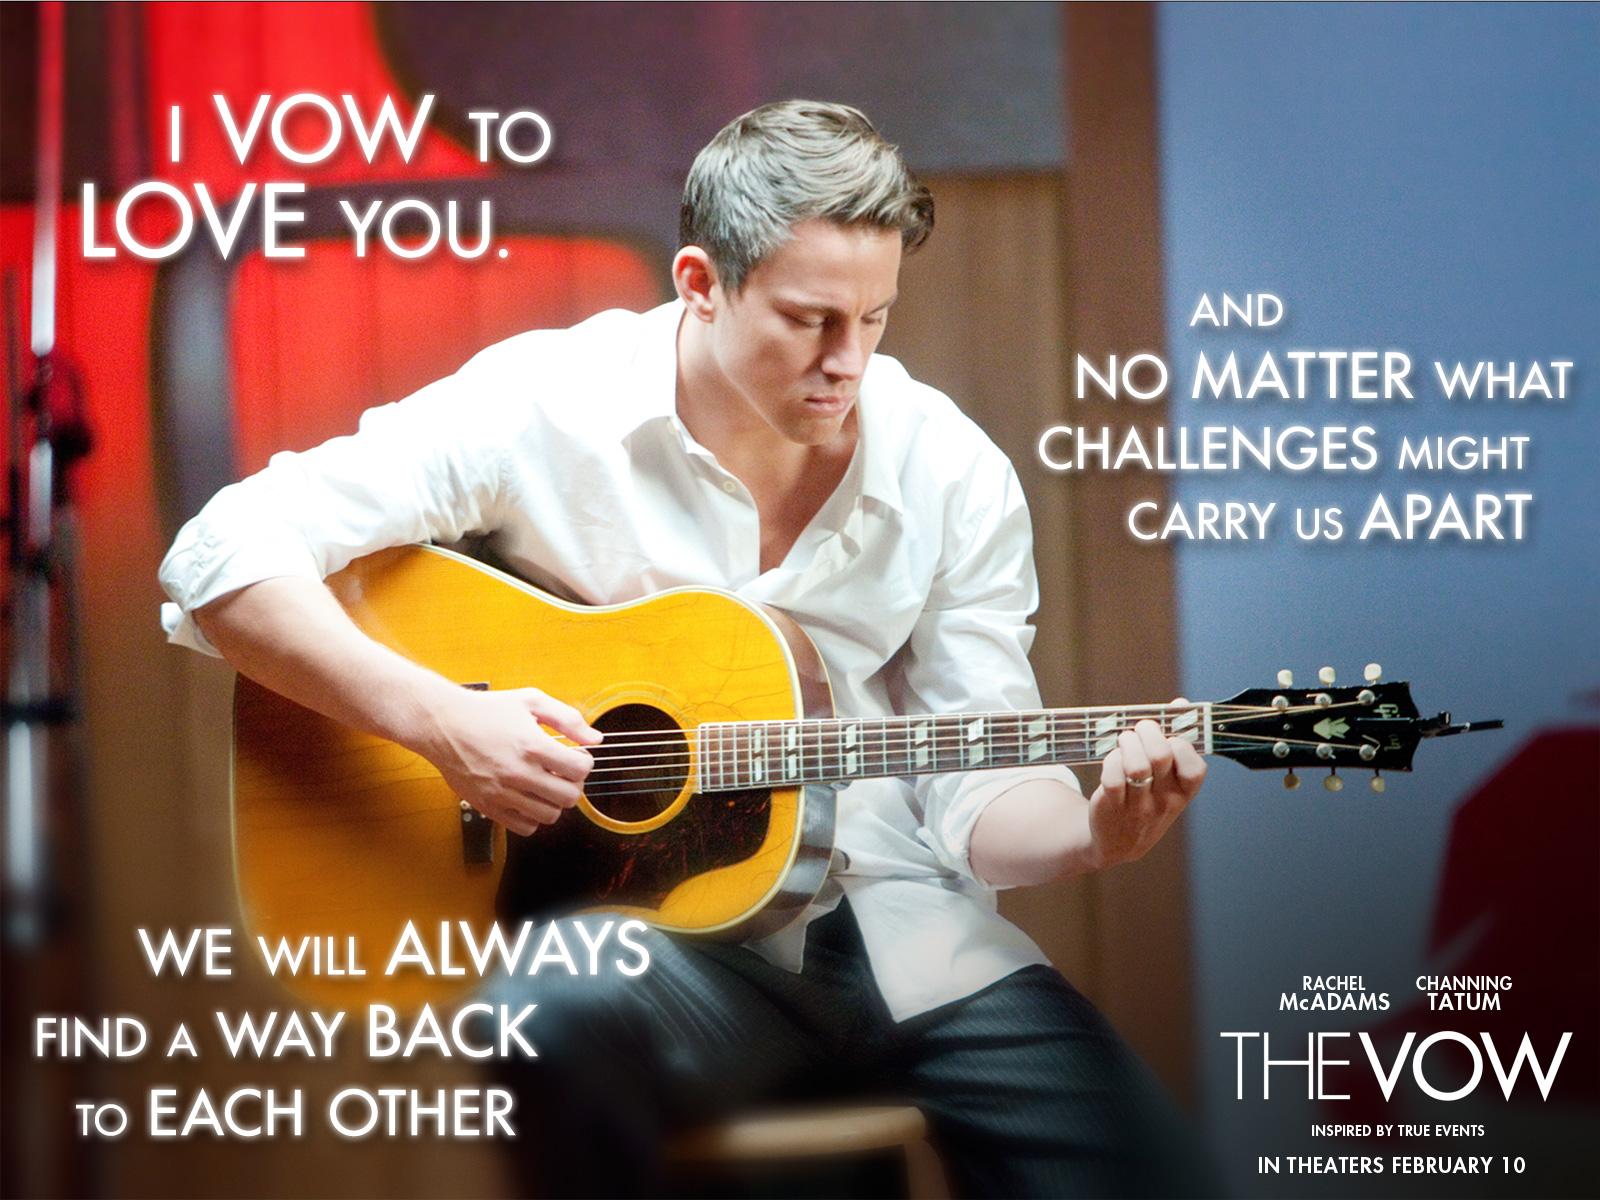 The Vow Wallpapers